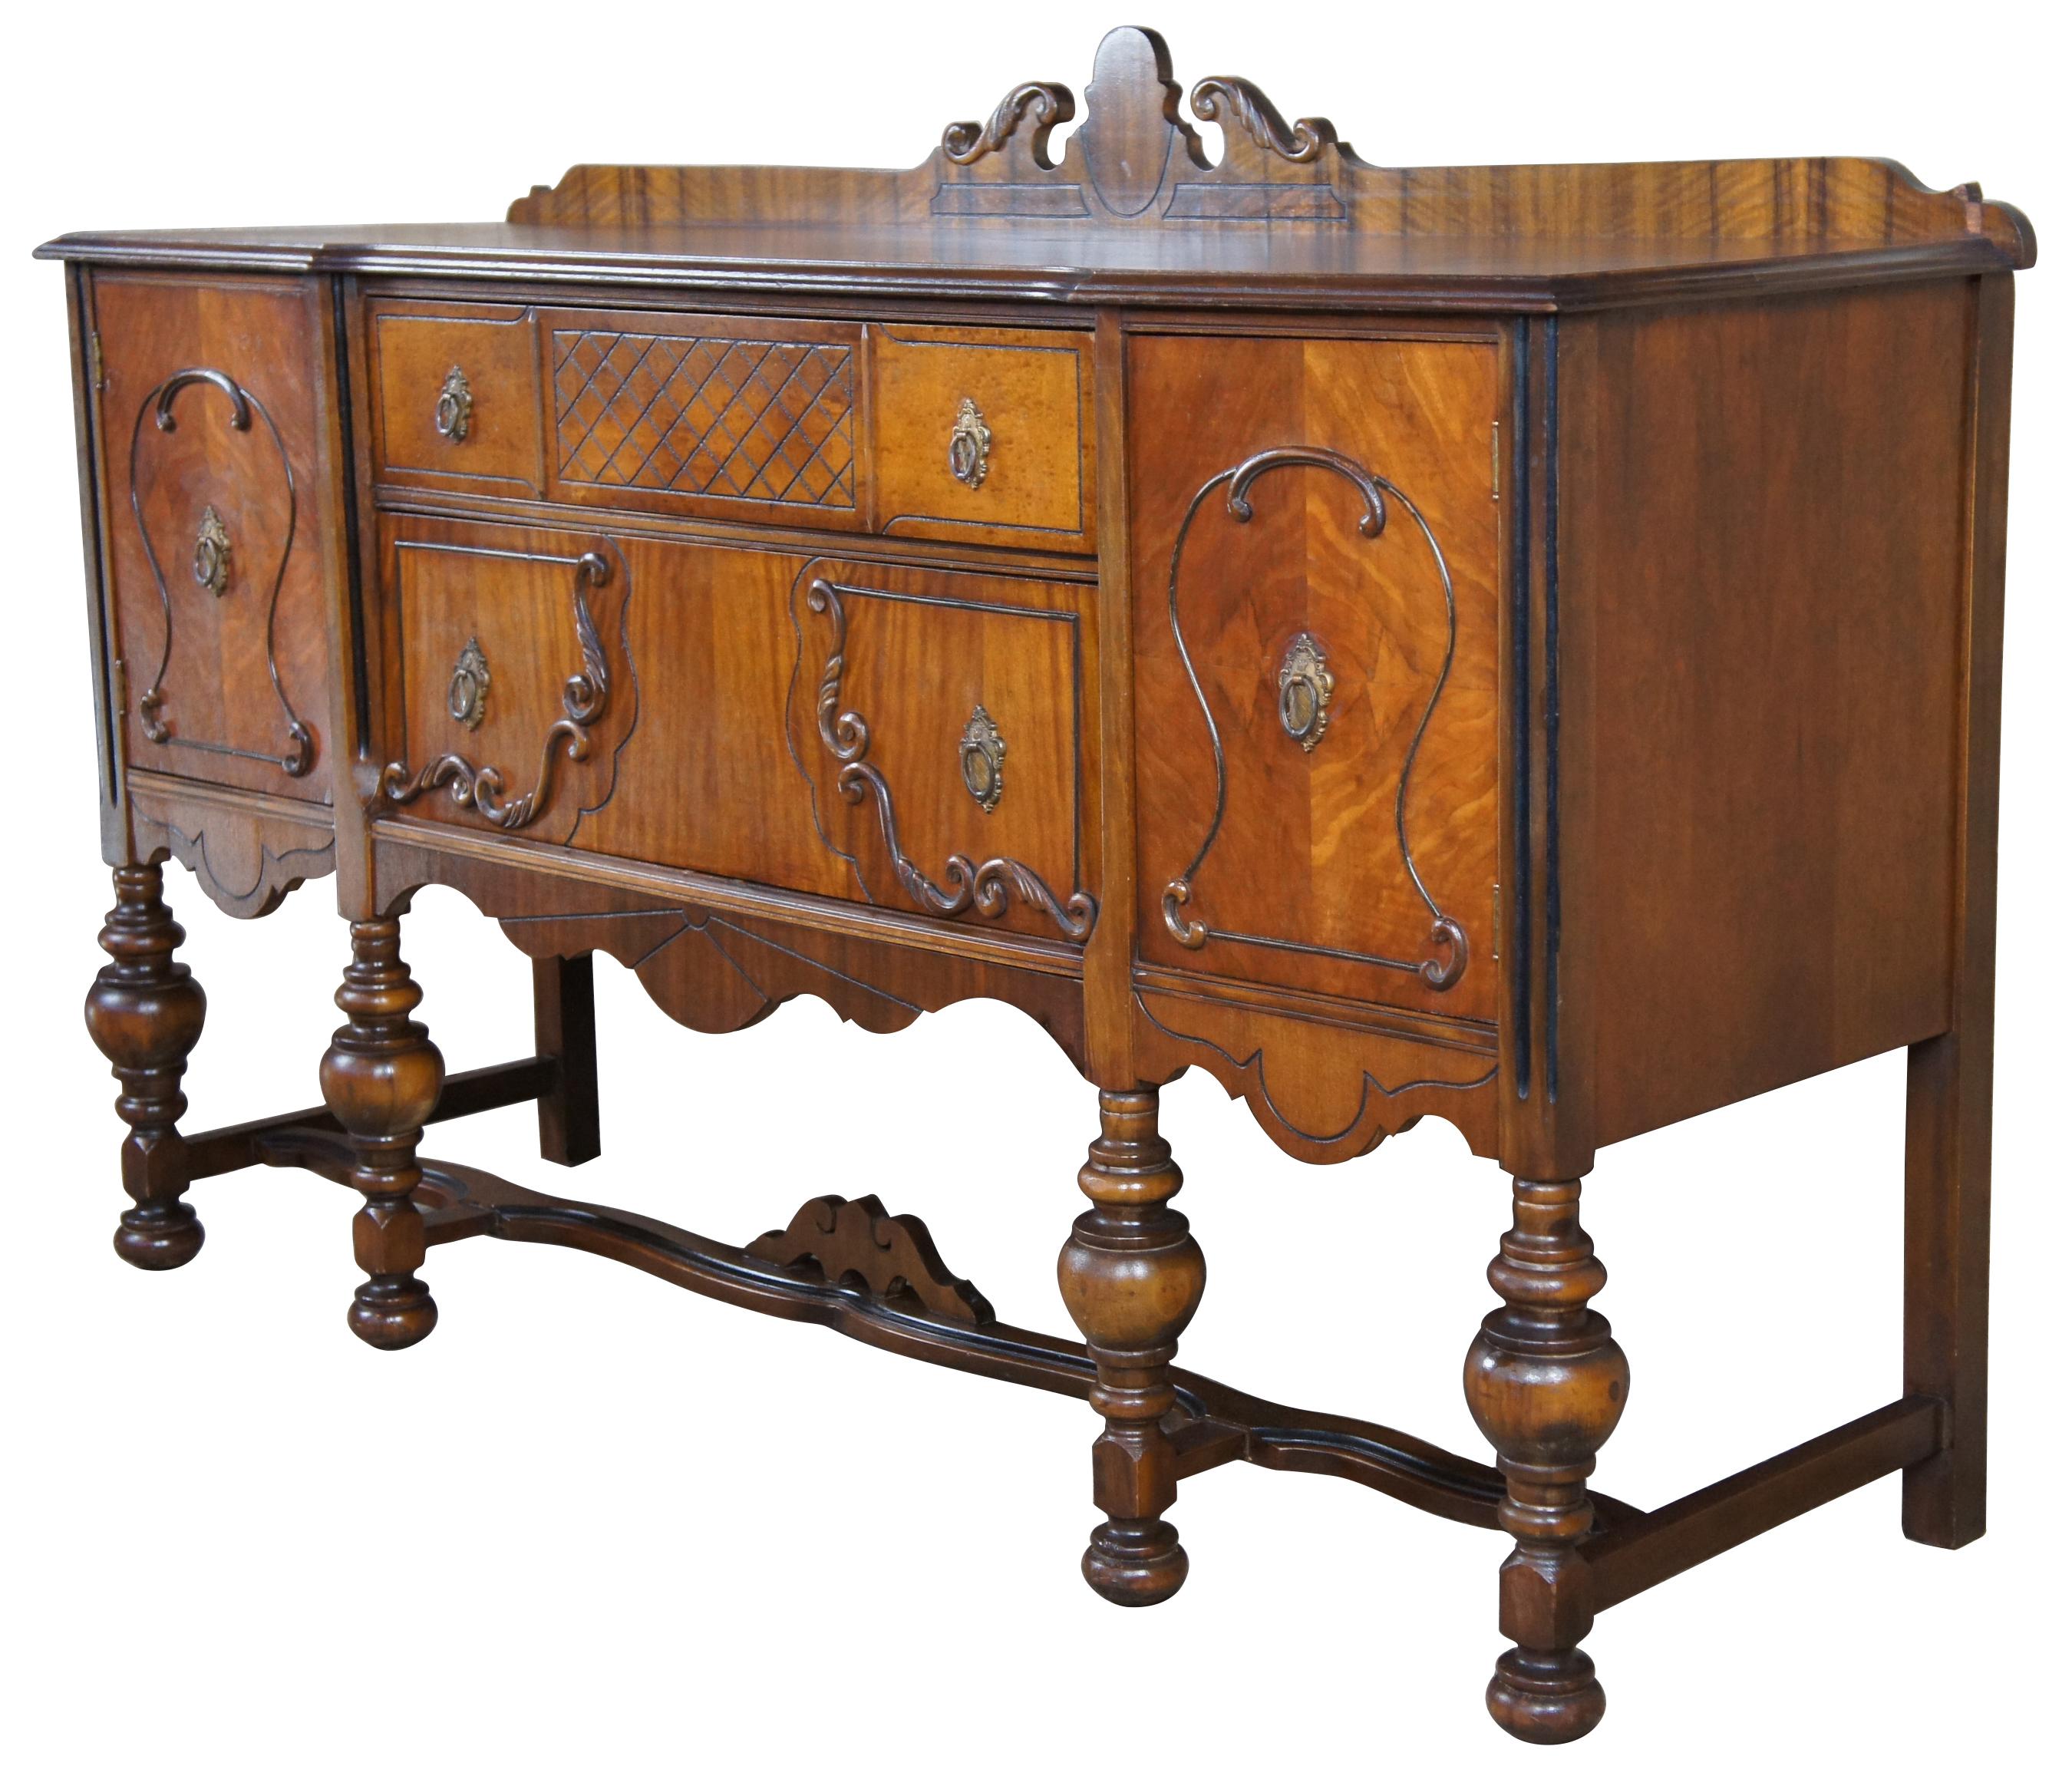 Turn of the century Jacobean or Elizabethan style sideboard. Made from walnut with burled fron, robust turned legs, ornate serpentine trestle base, and scolled accents. Features two long central drawers flanked by outer cabinets. Measure: